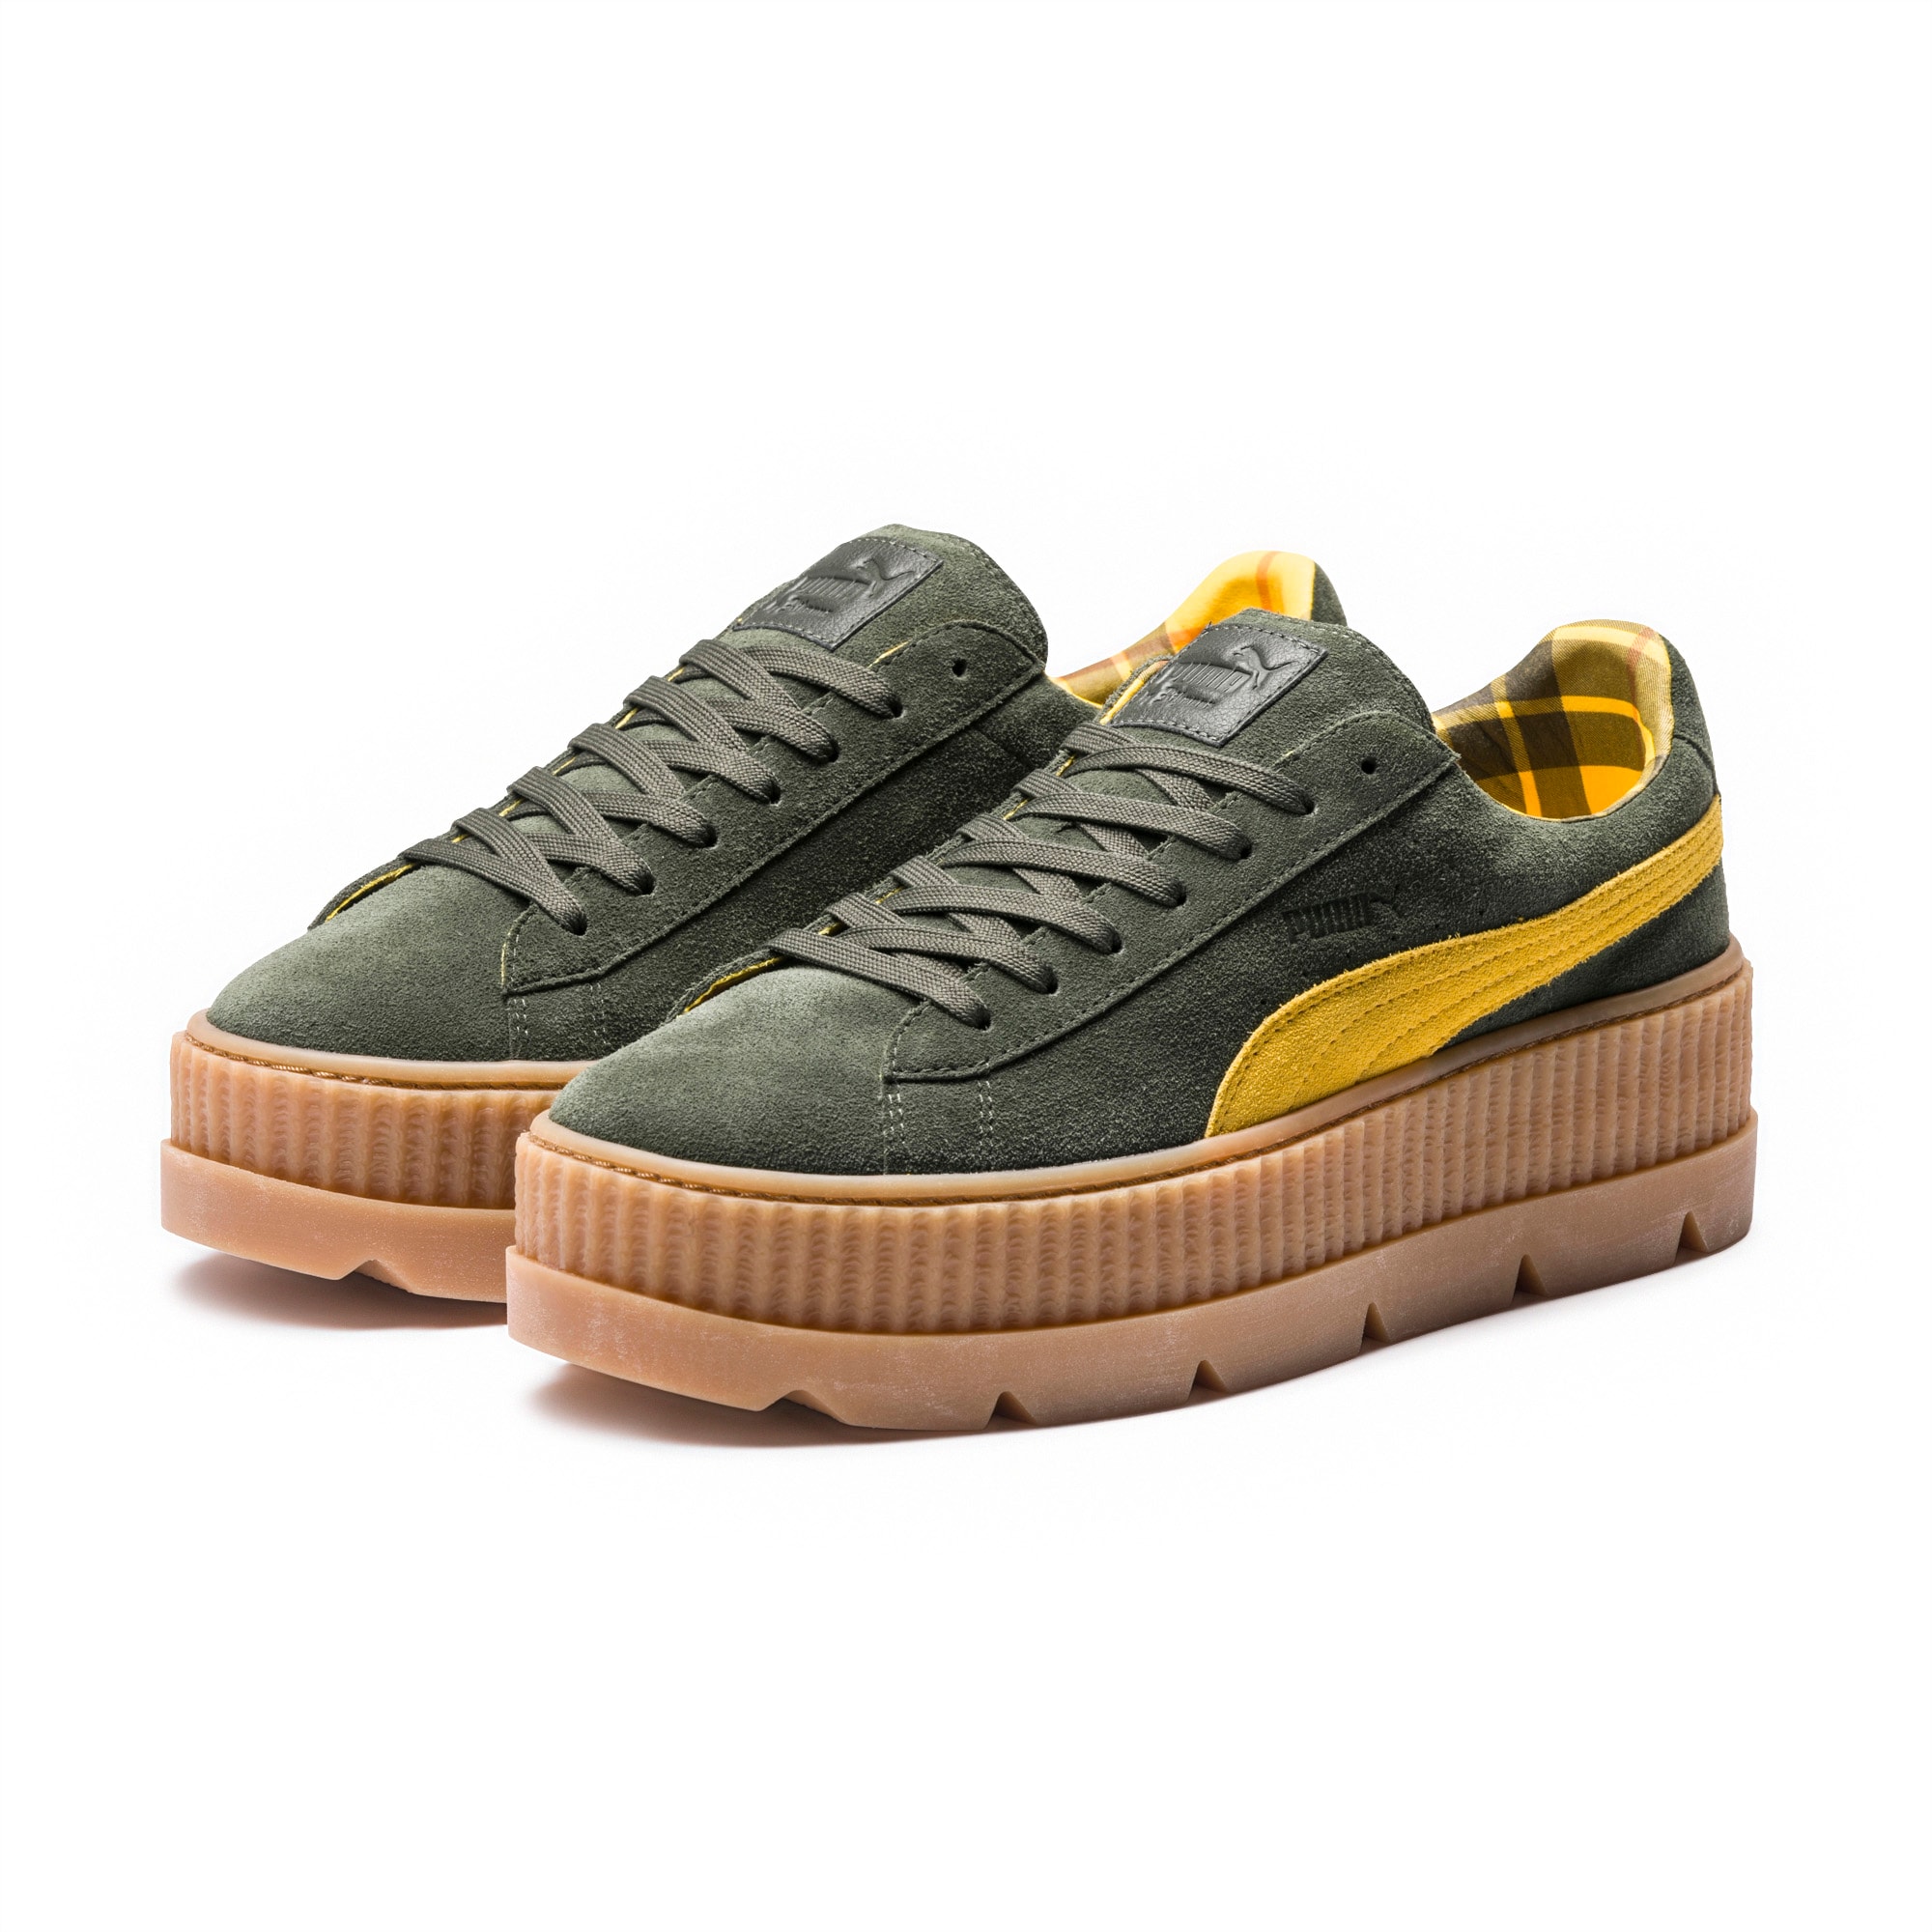 puma suede creepers for sale